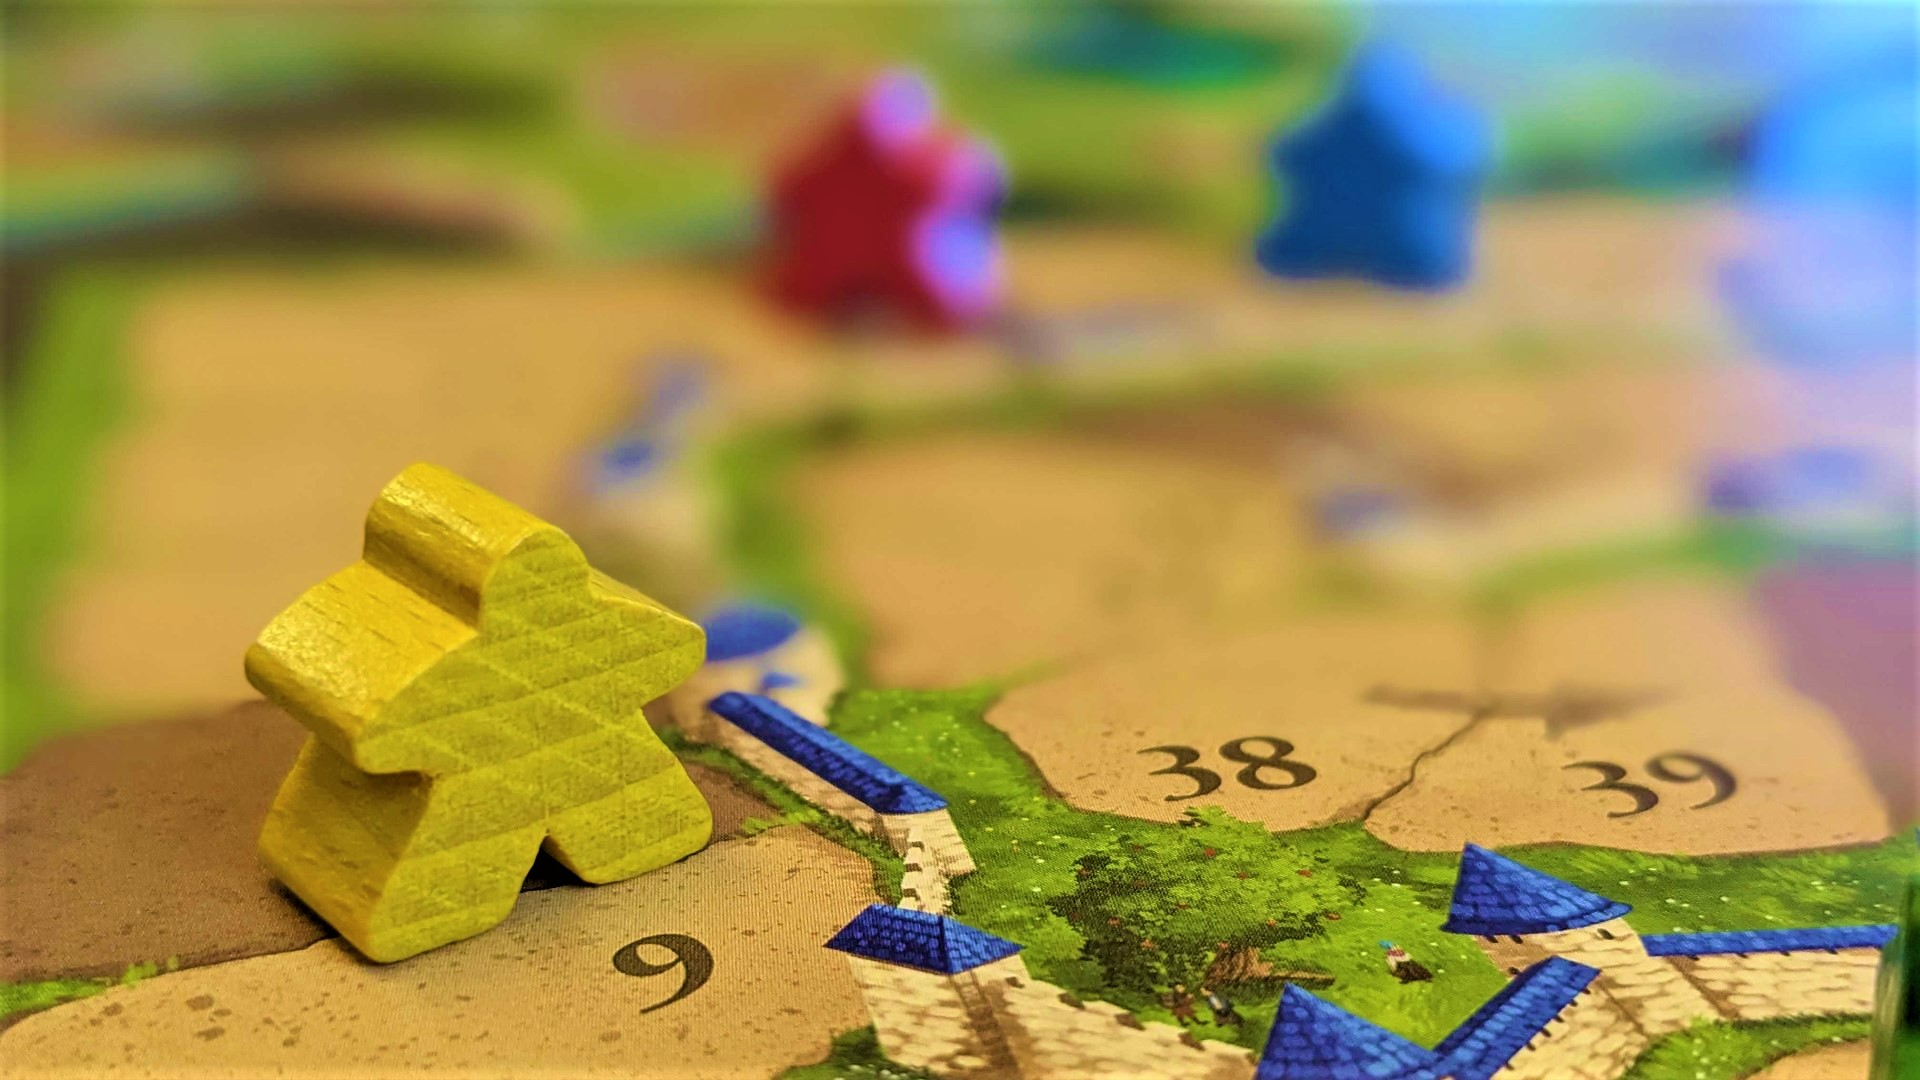 Meeples and scoring board from Carcassonne, one of the best gateway games